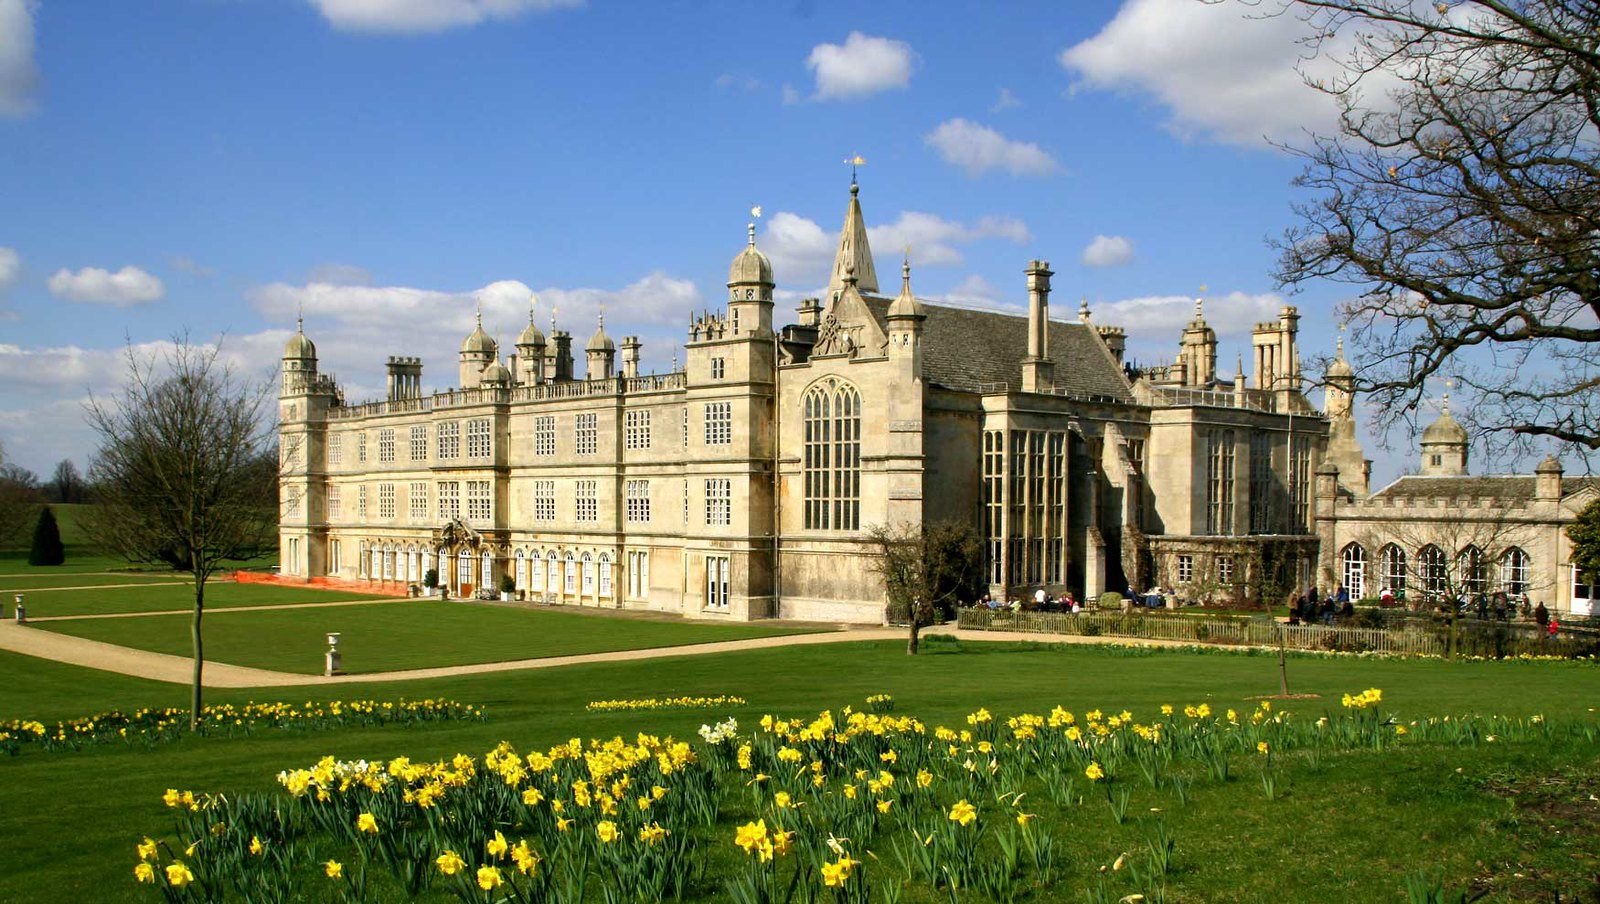 Burghley House near Stamford is one of the properties mentioned in the Historic England report